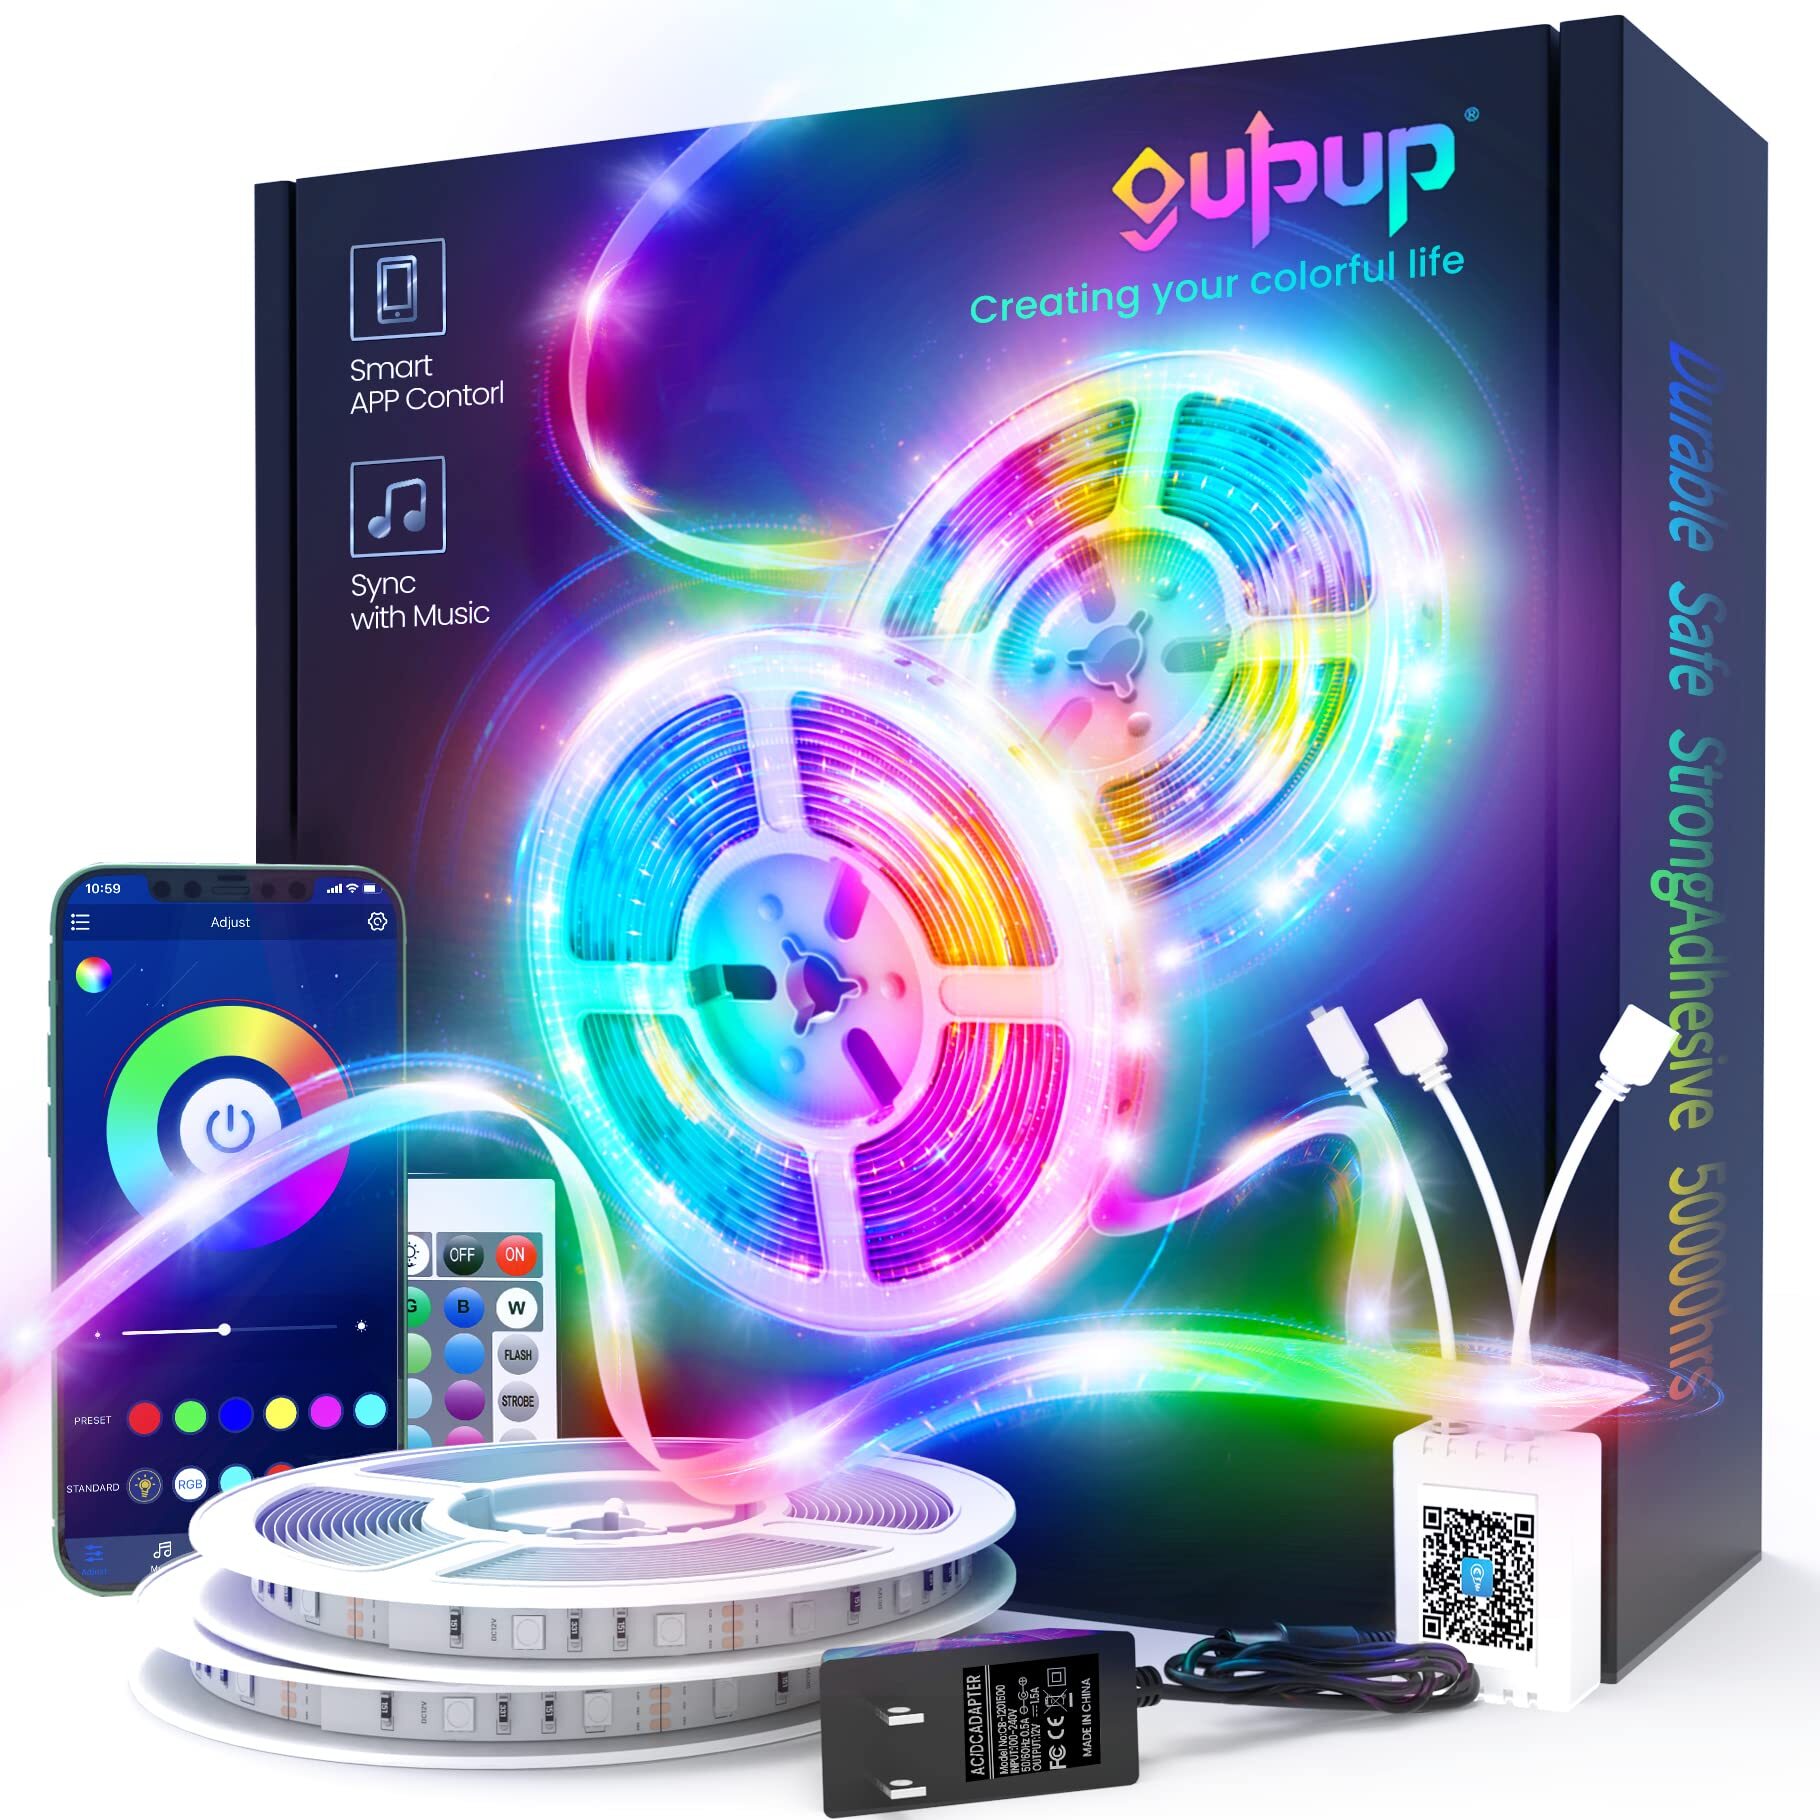 GUPUP 150 feet (about 150 meters) LED light strip, rope light, Bluetooth app control, color changing light strip, light and music synchronization